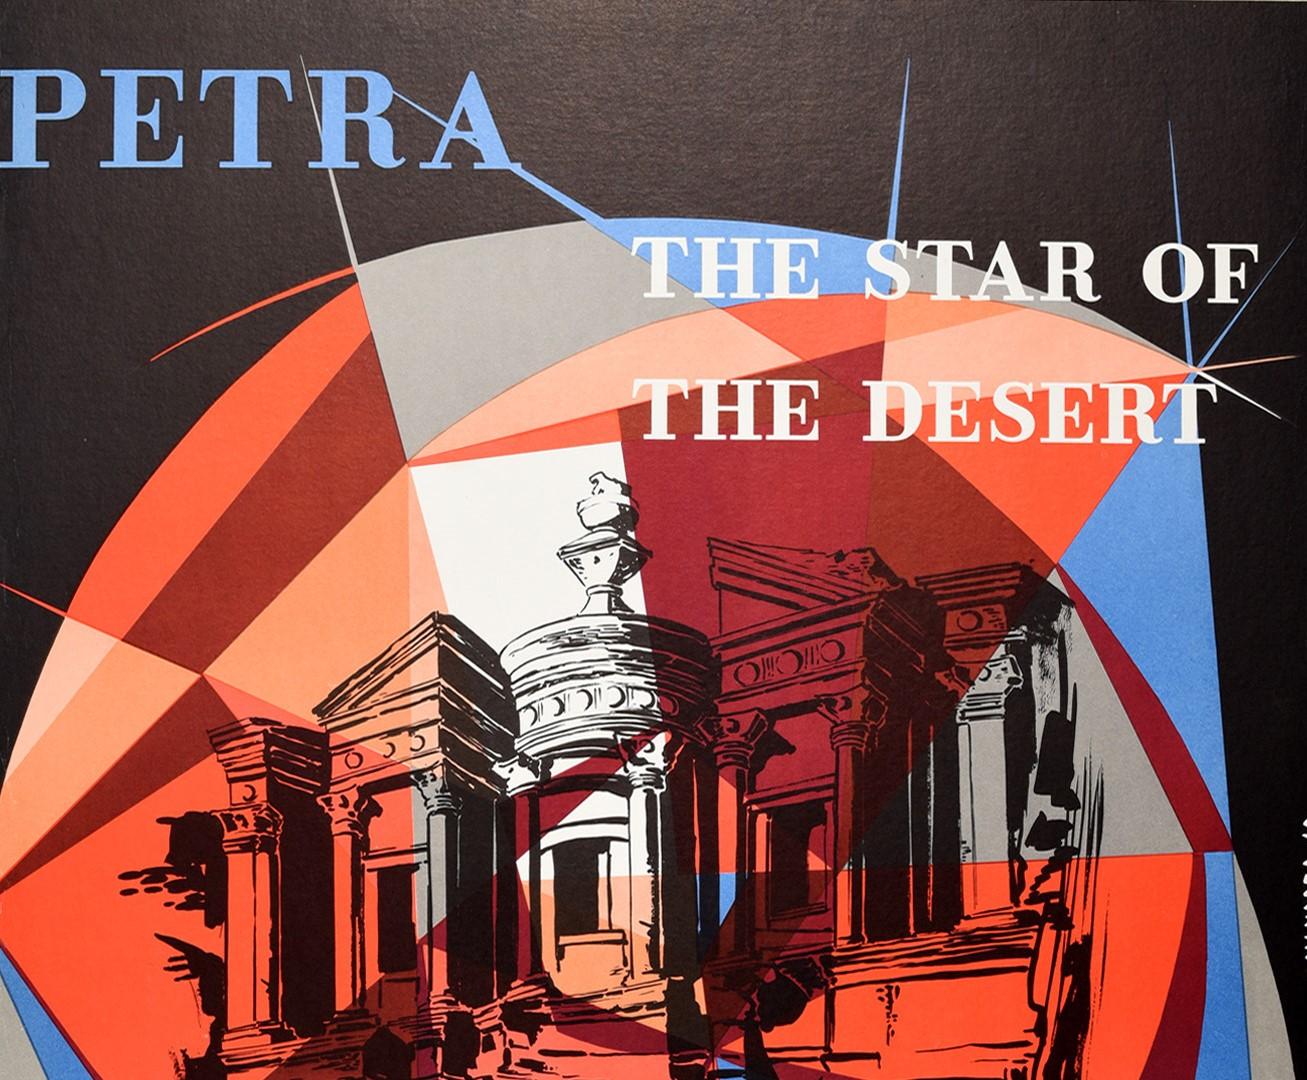 Original Vintage Travel Poster Petra The Star Of The Desert Jordan The Holy Land - Print by C. d'Andrea